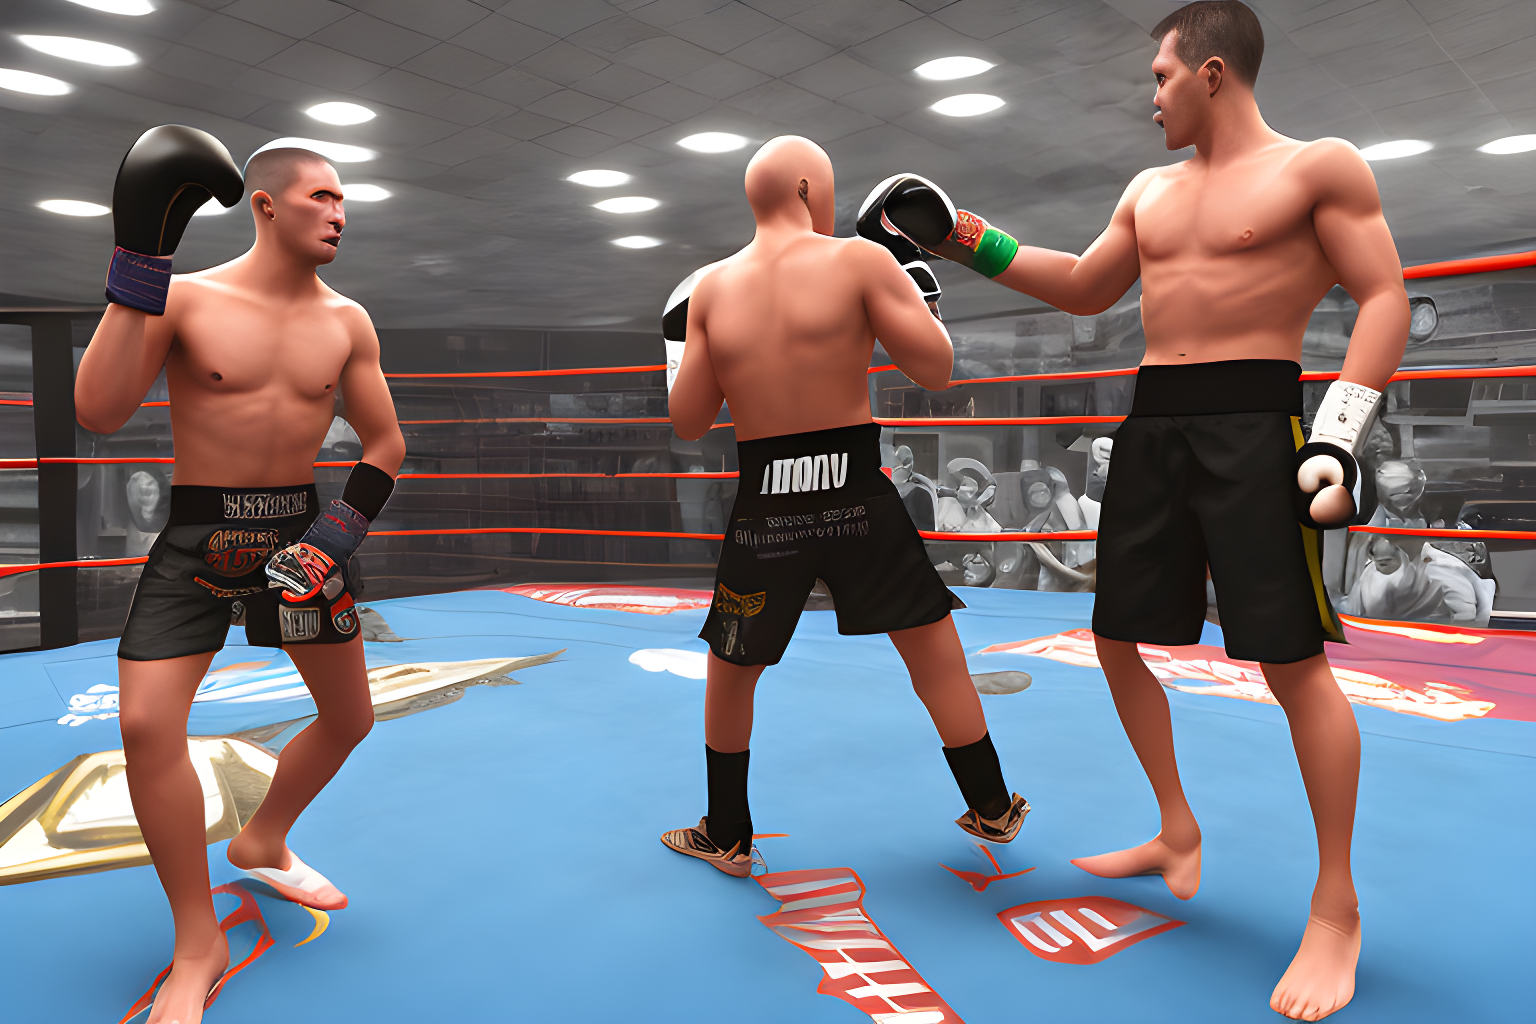 mdjrny-v4 style mma fighters in the boxing ring